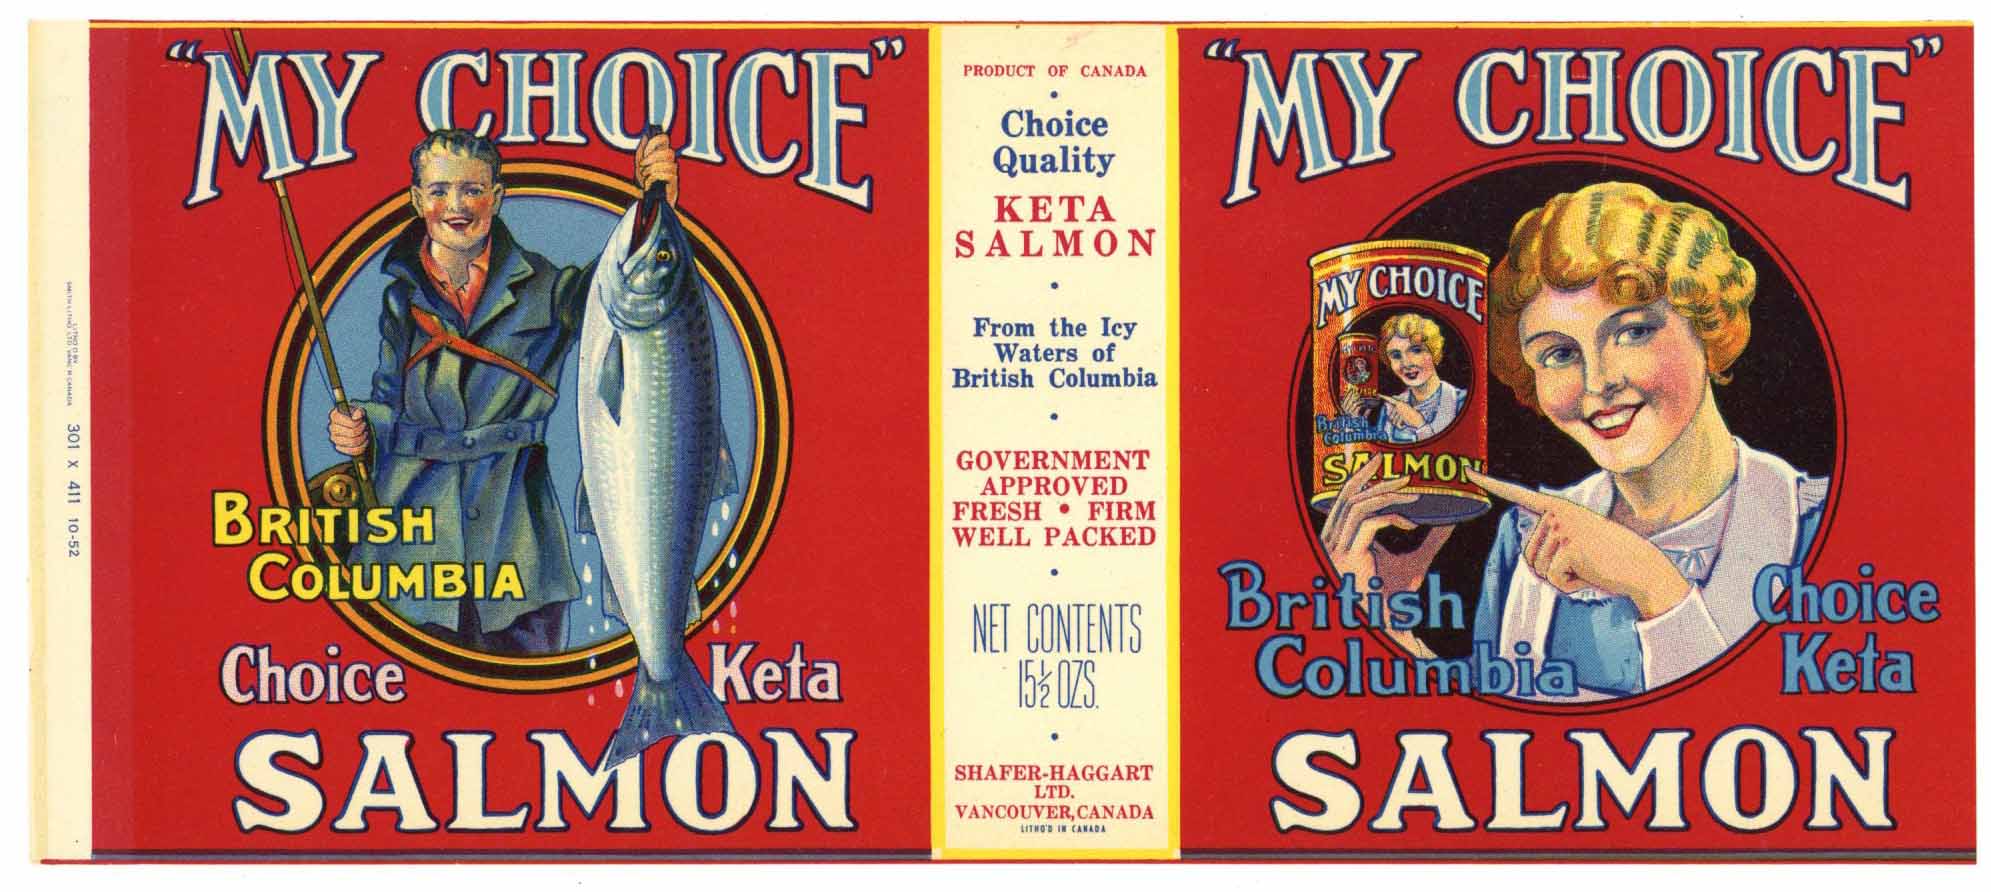 My Choice Brand Vintage Vancouver Canada Salmon Can Label, red